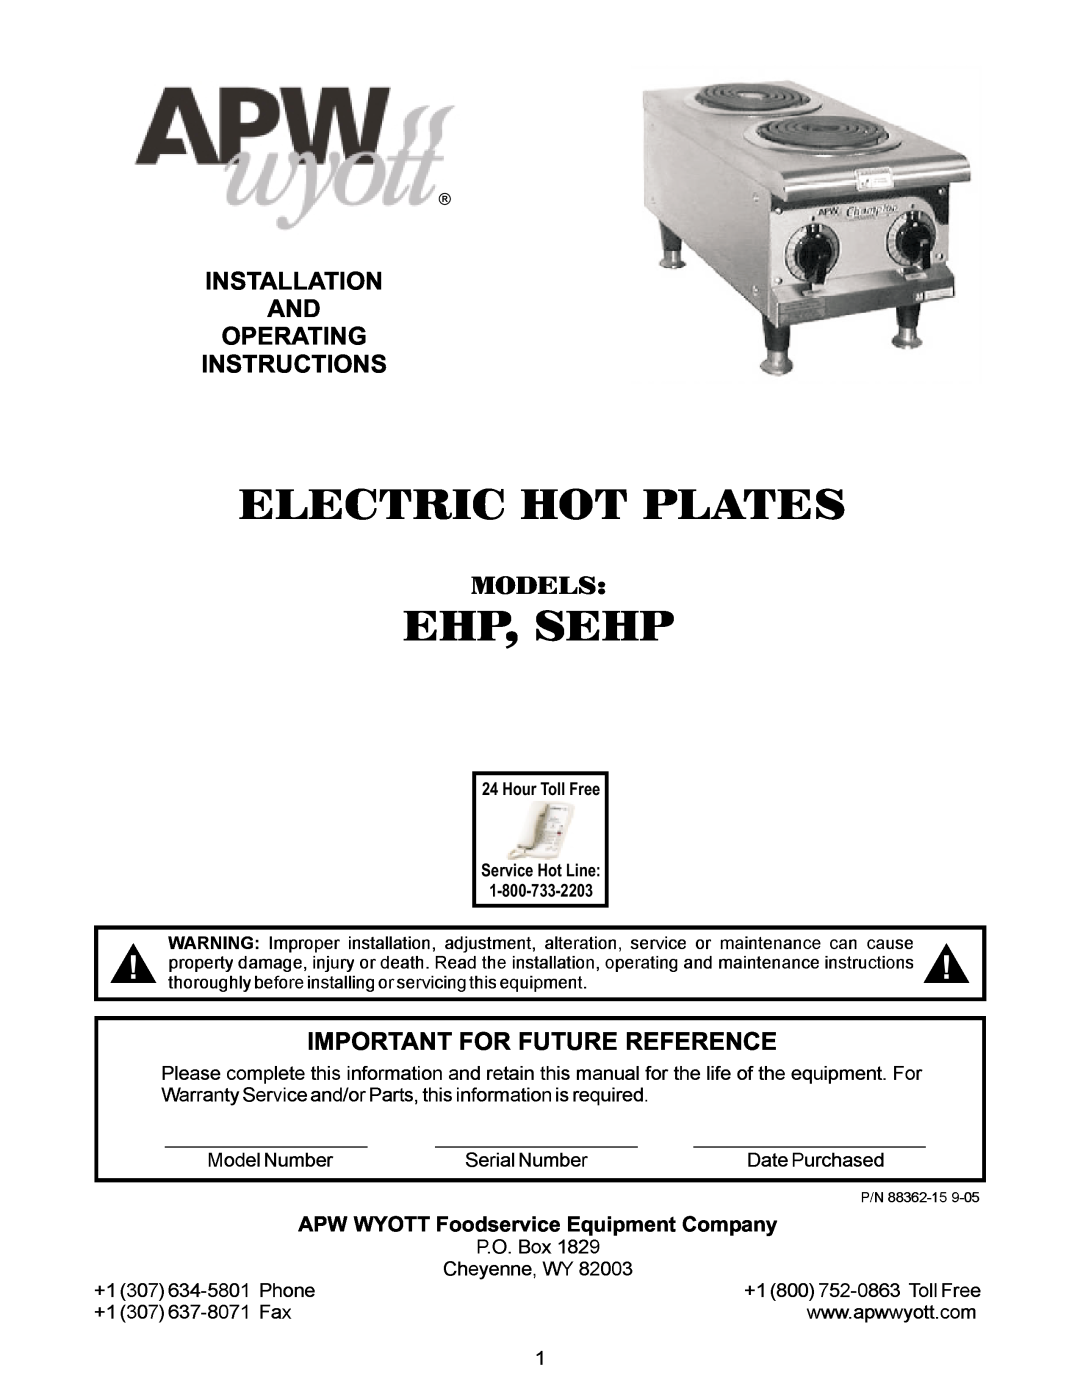 APW Wyott SEHP manual Installation And Operating Instructions, Important For Future Reference, Electric Hot Plates, Models 